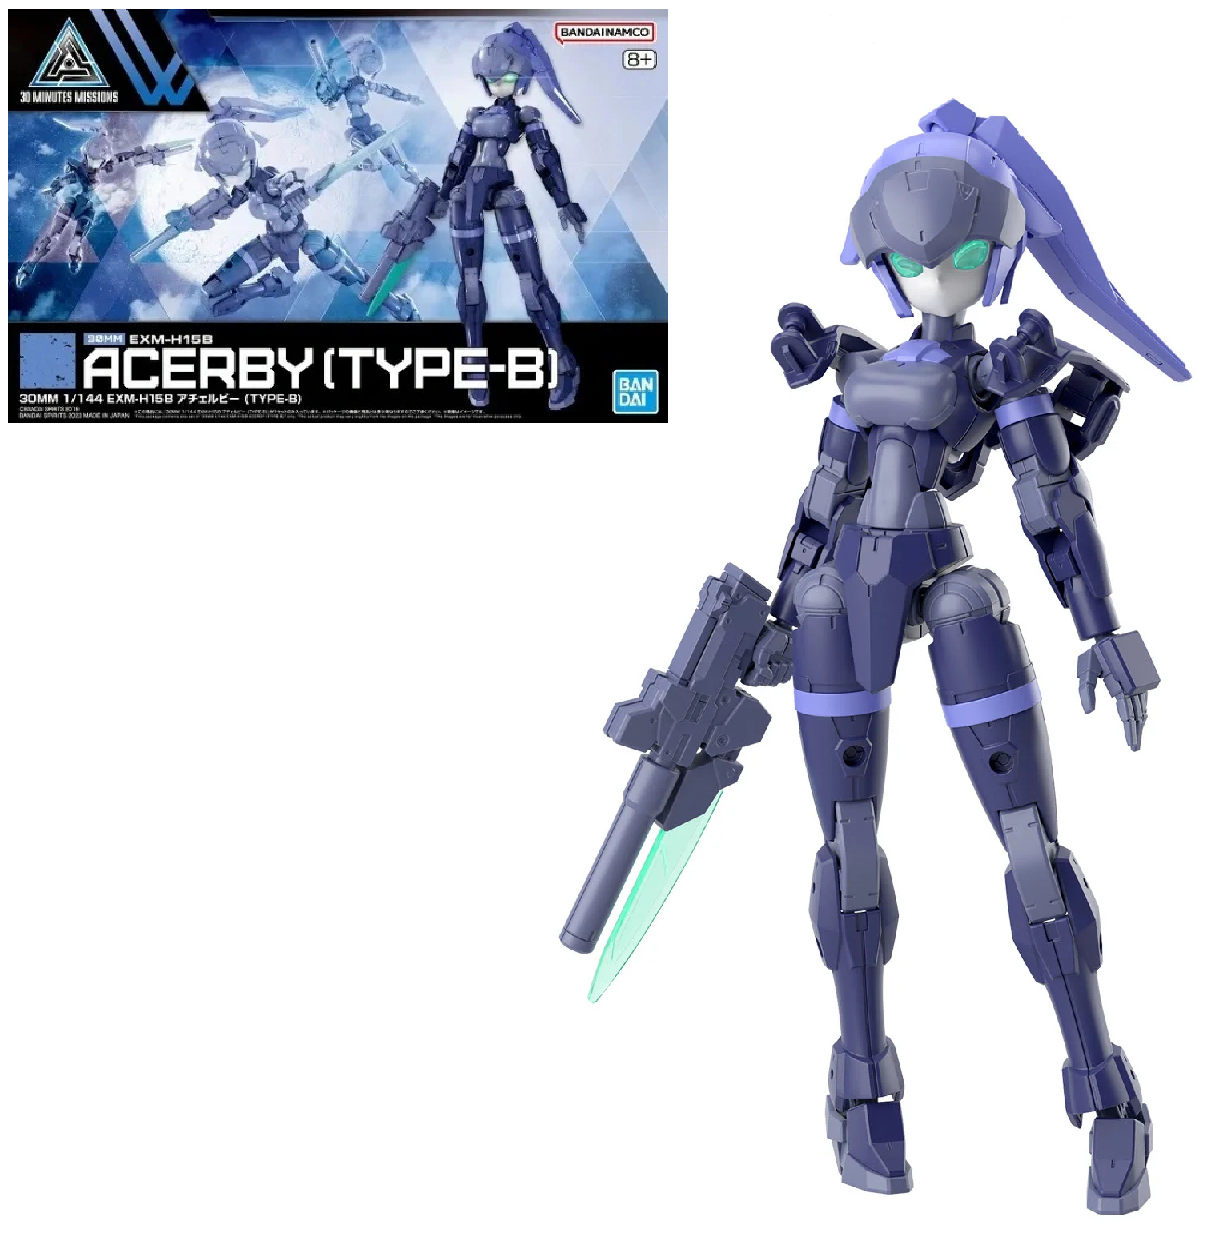 Bandai -30 Minute Missions EXM-H15B Acerby 30MM 1 144 Type B